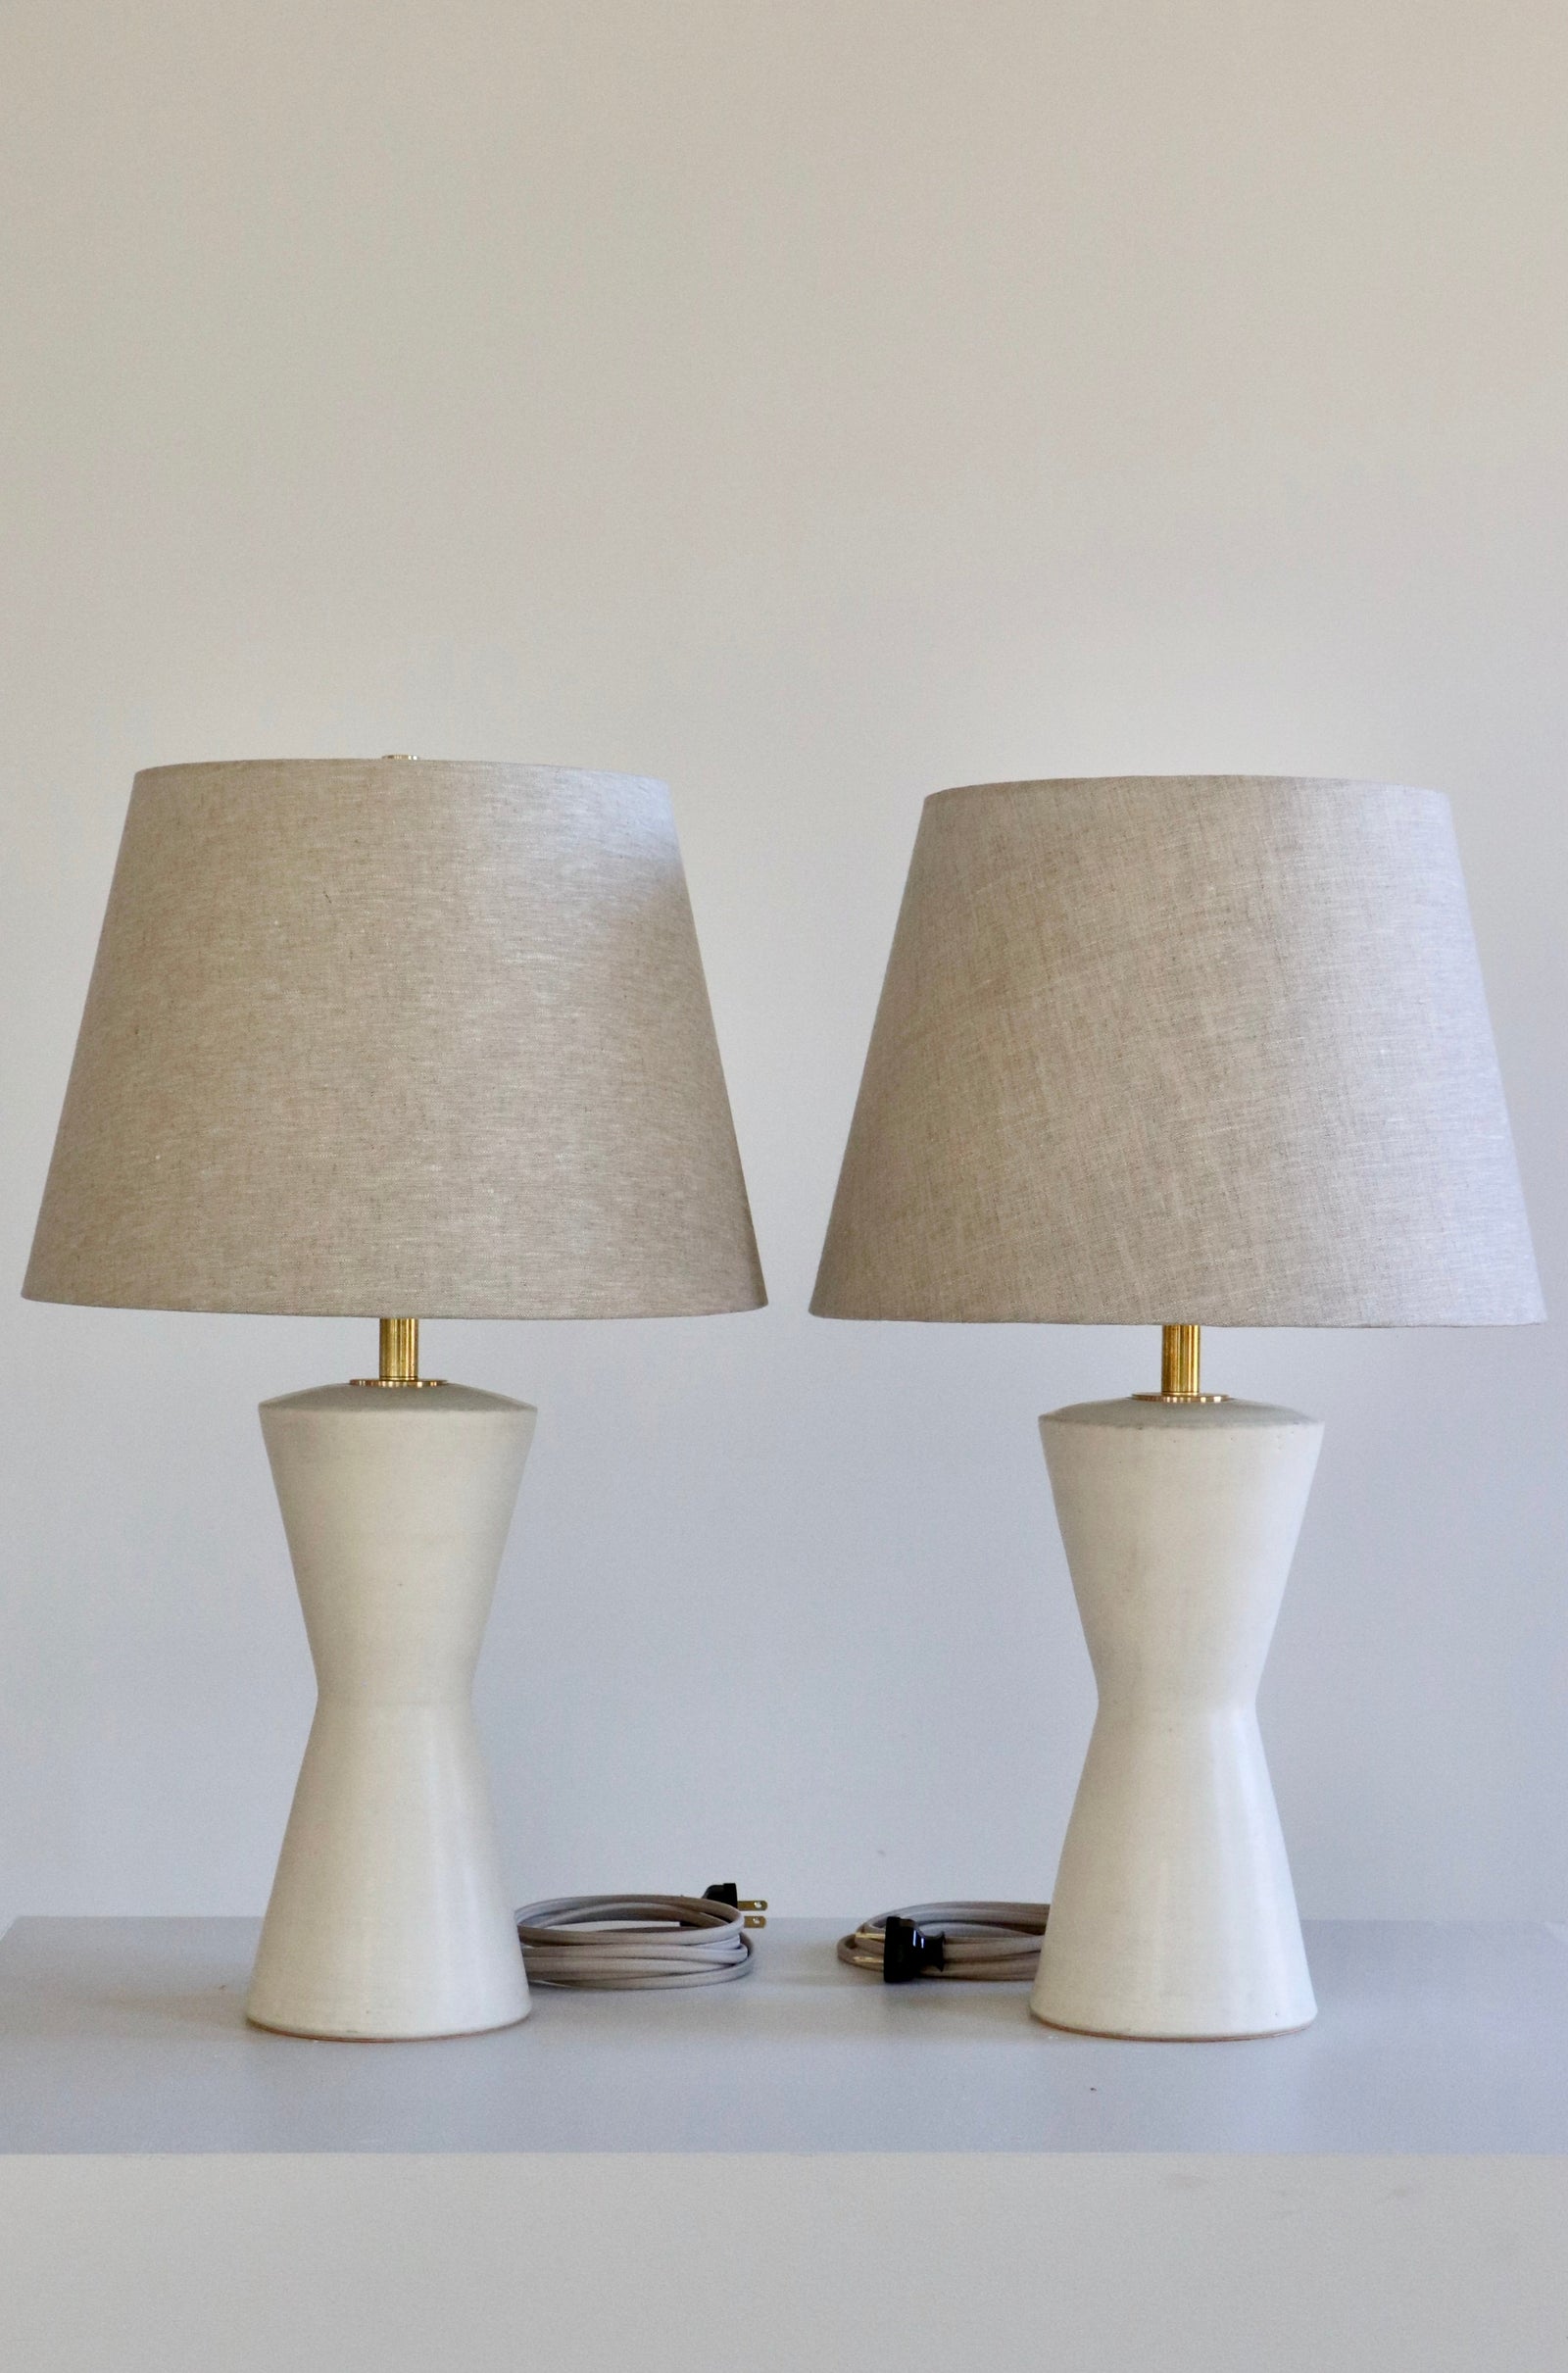 Albia 22"Lamp pair in Stone with Oatmeal Linen Shade